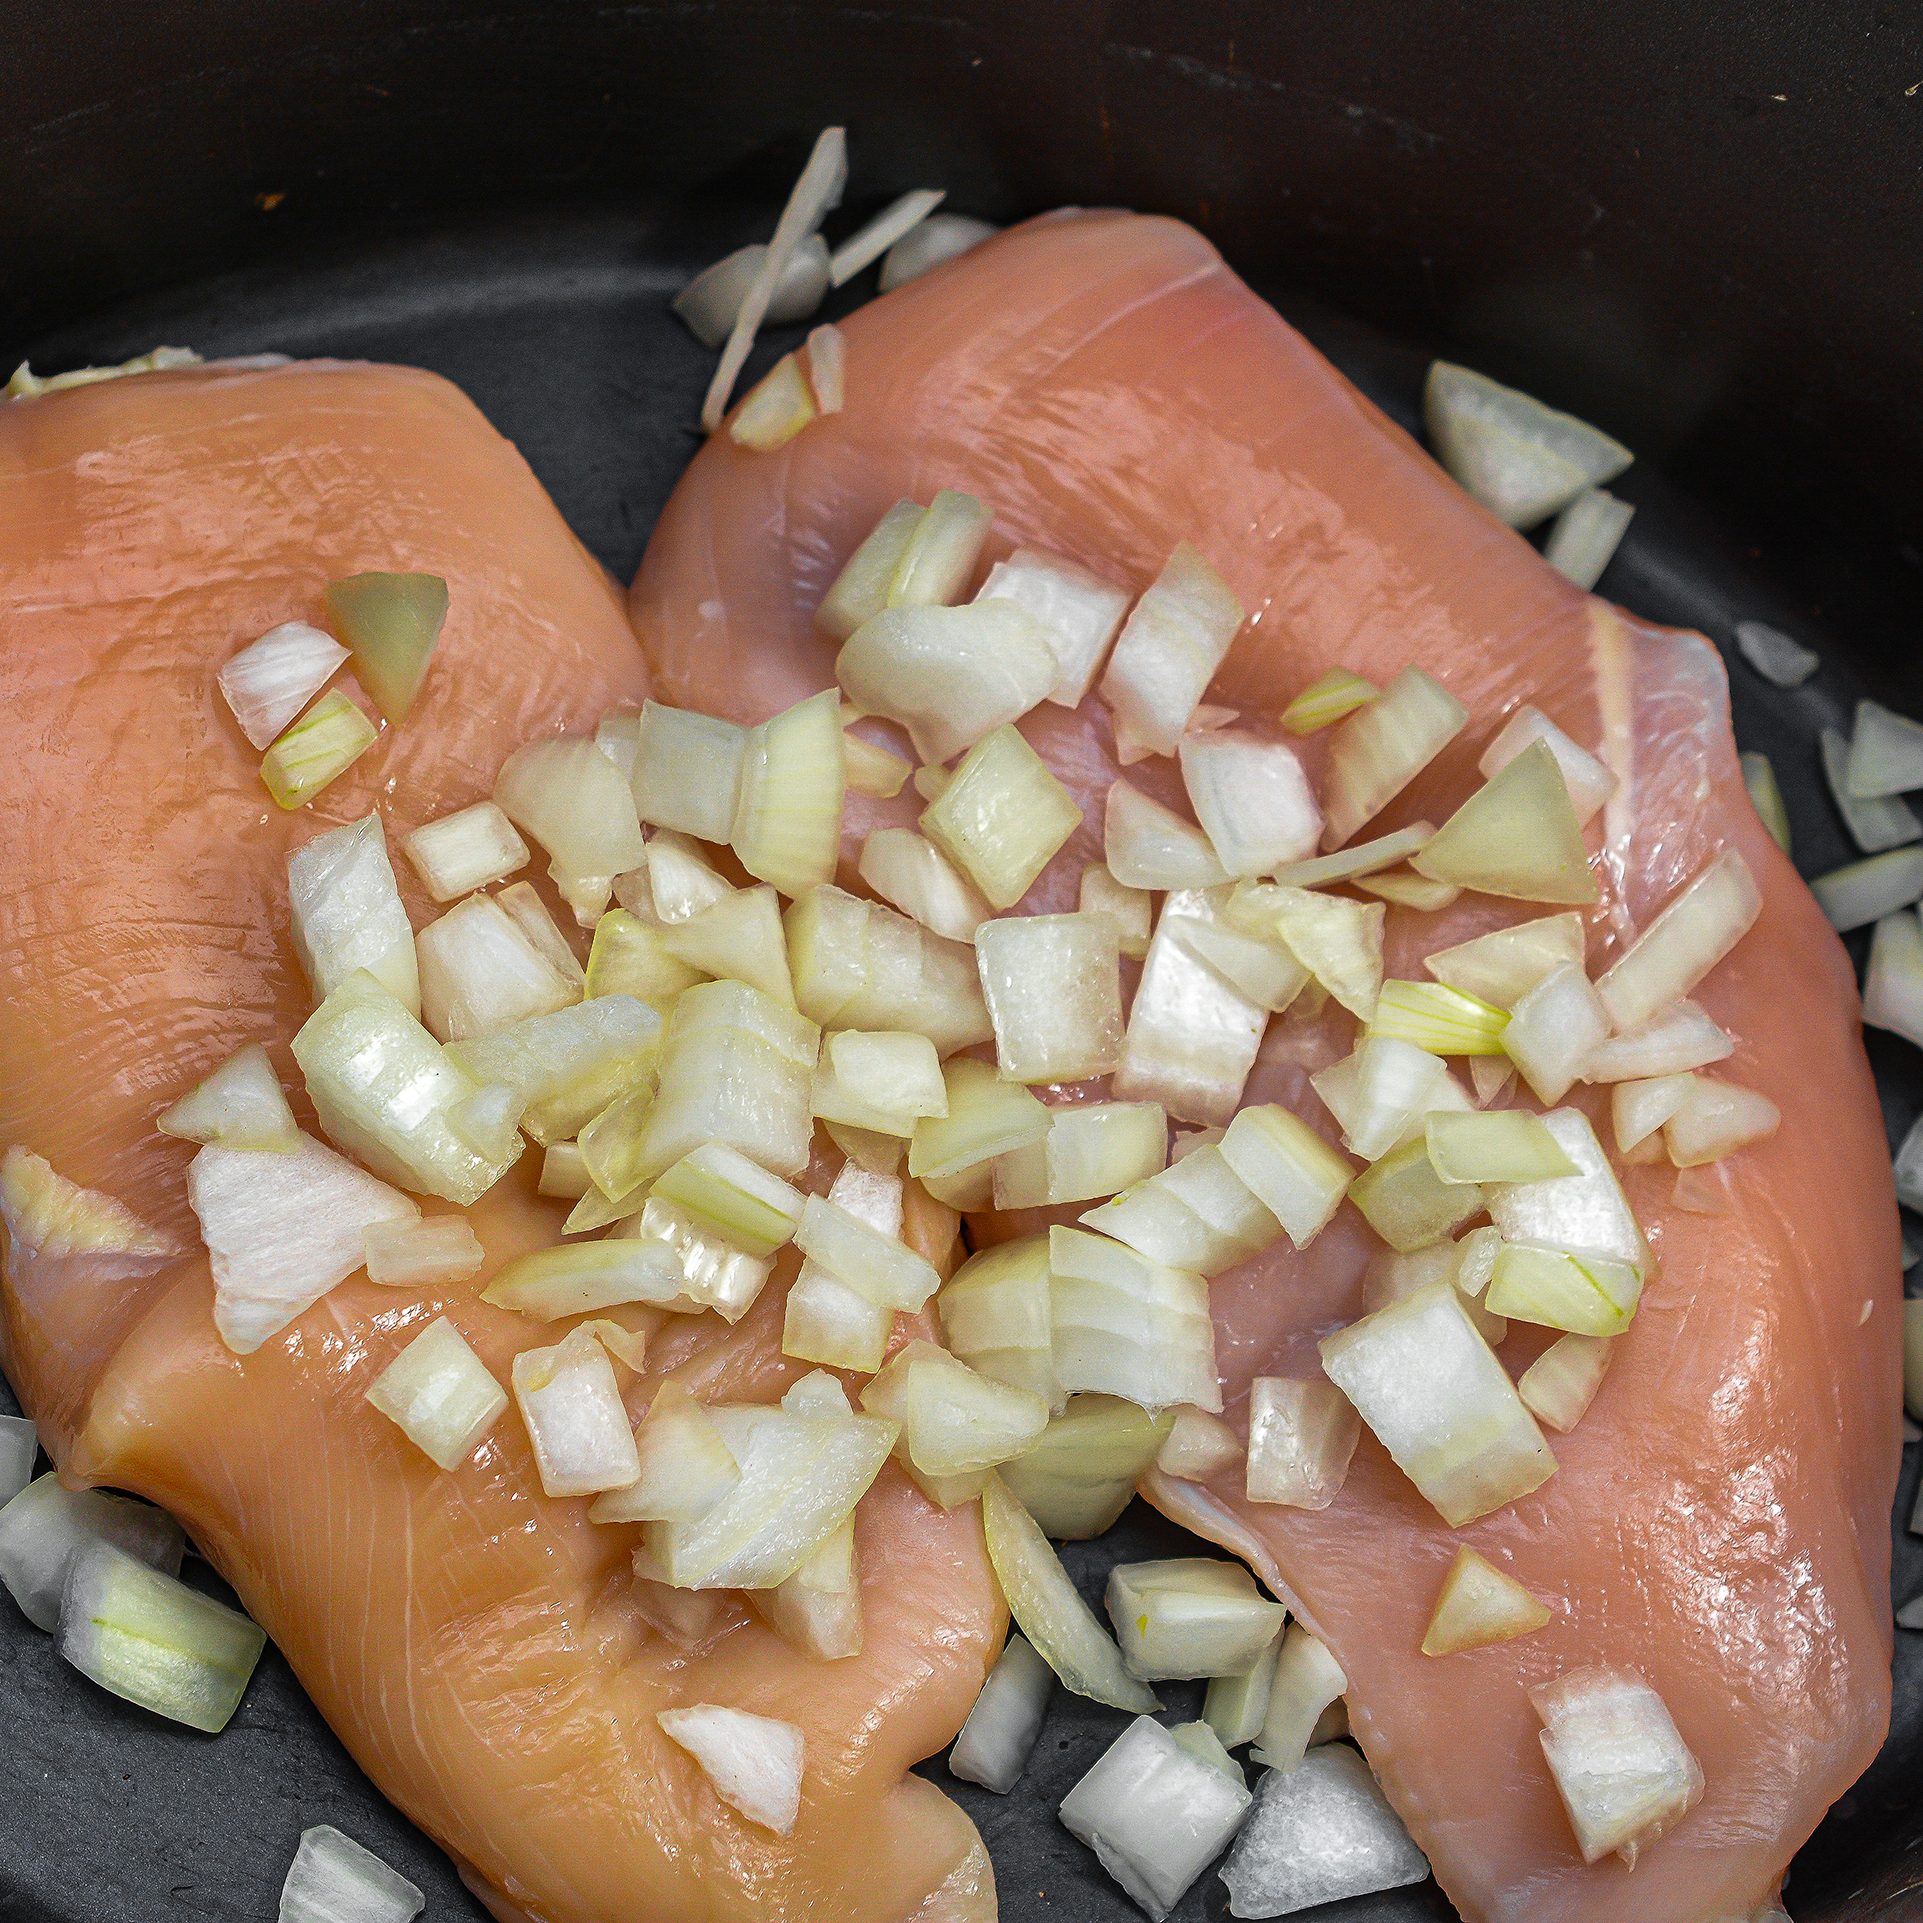 Place the chicken in the crockpot.  Add in the onions and corn.